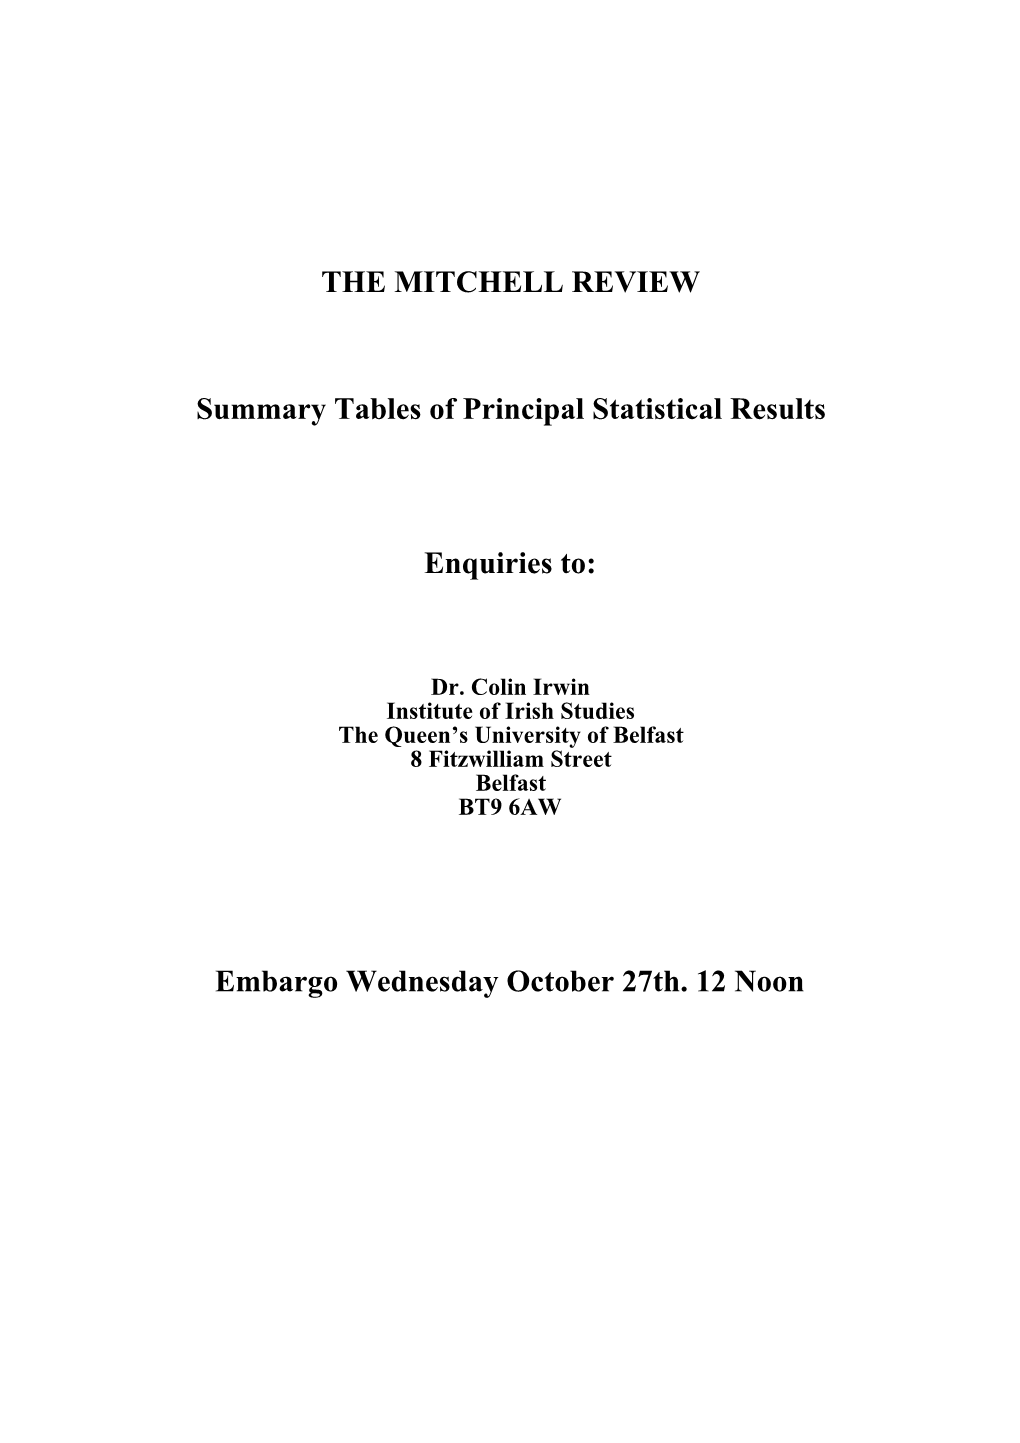 THE MITCHELL REVIEW Summary Tables of Principal